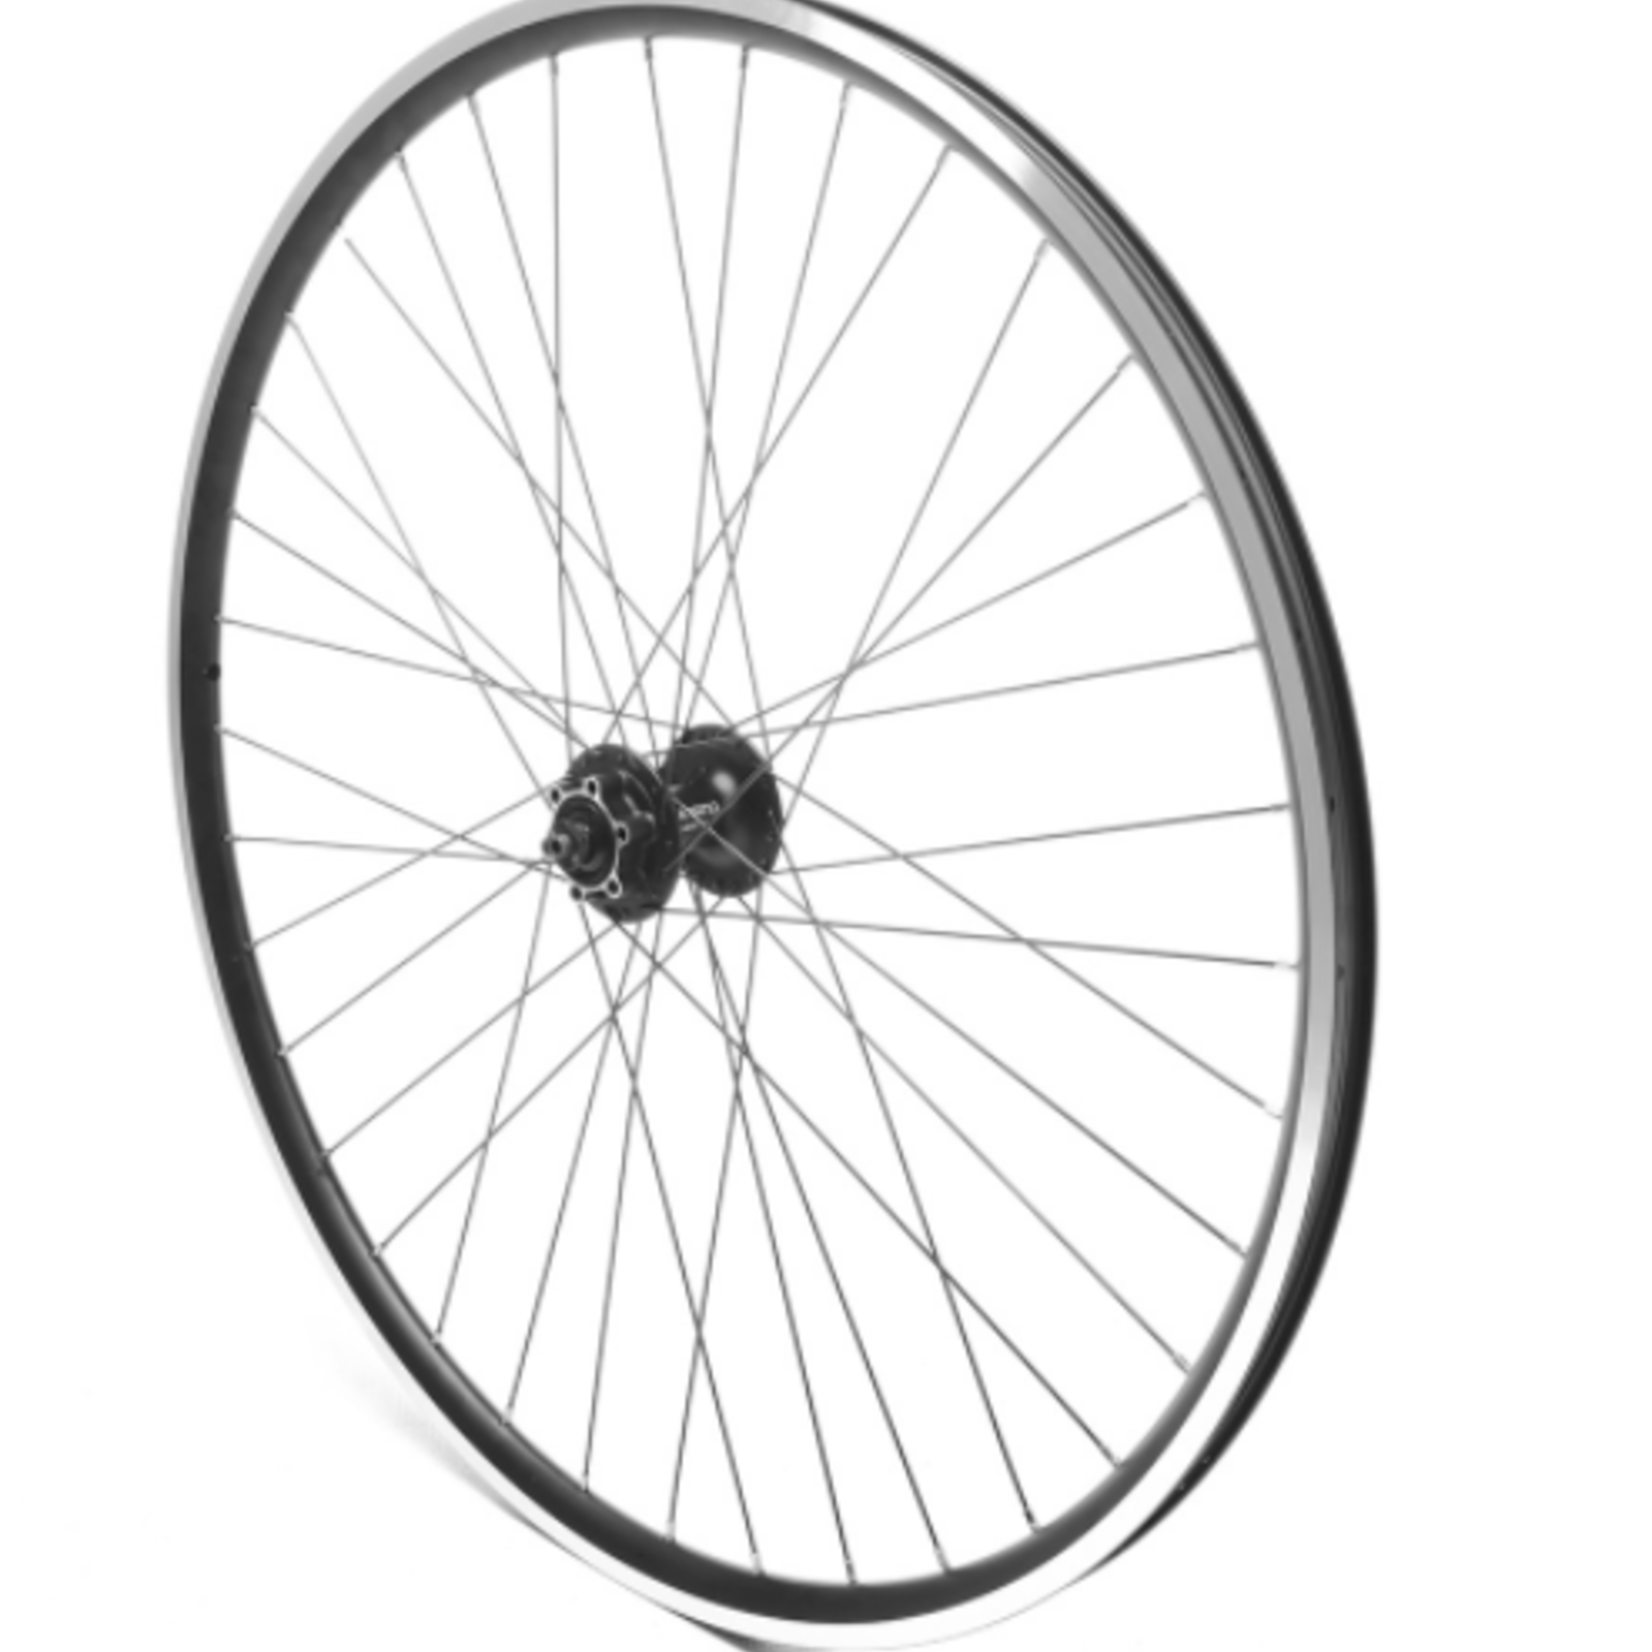 Oxford Oxford Front Wheel 700c Hybrid Black Double Wall Shimano 475